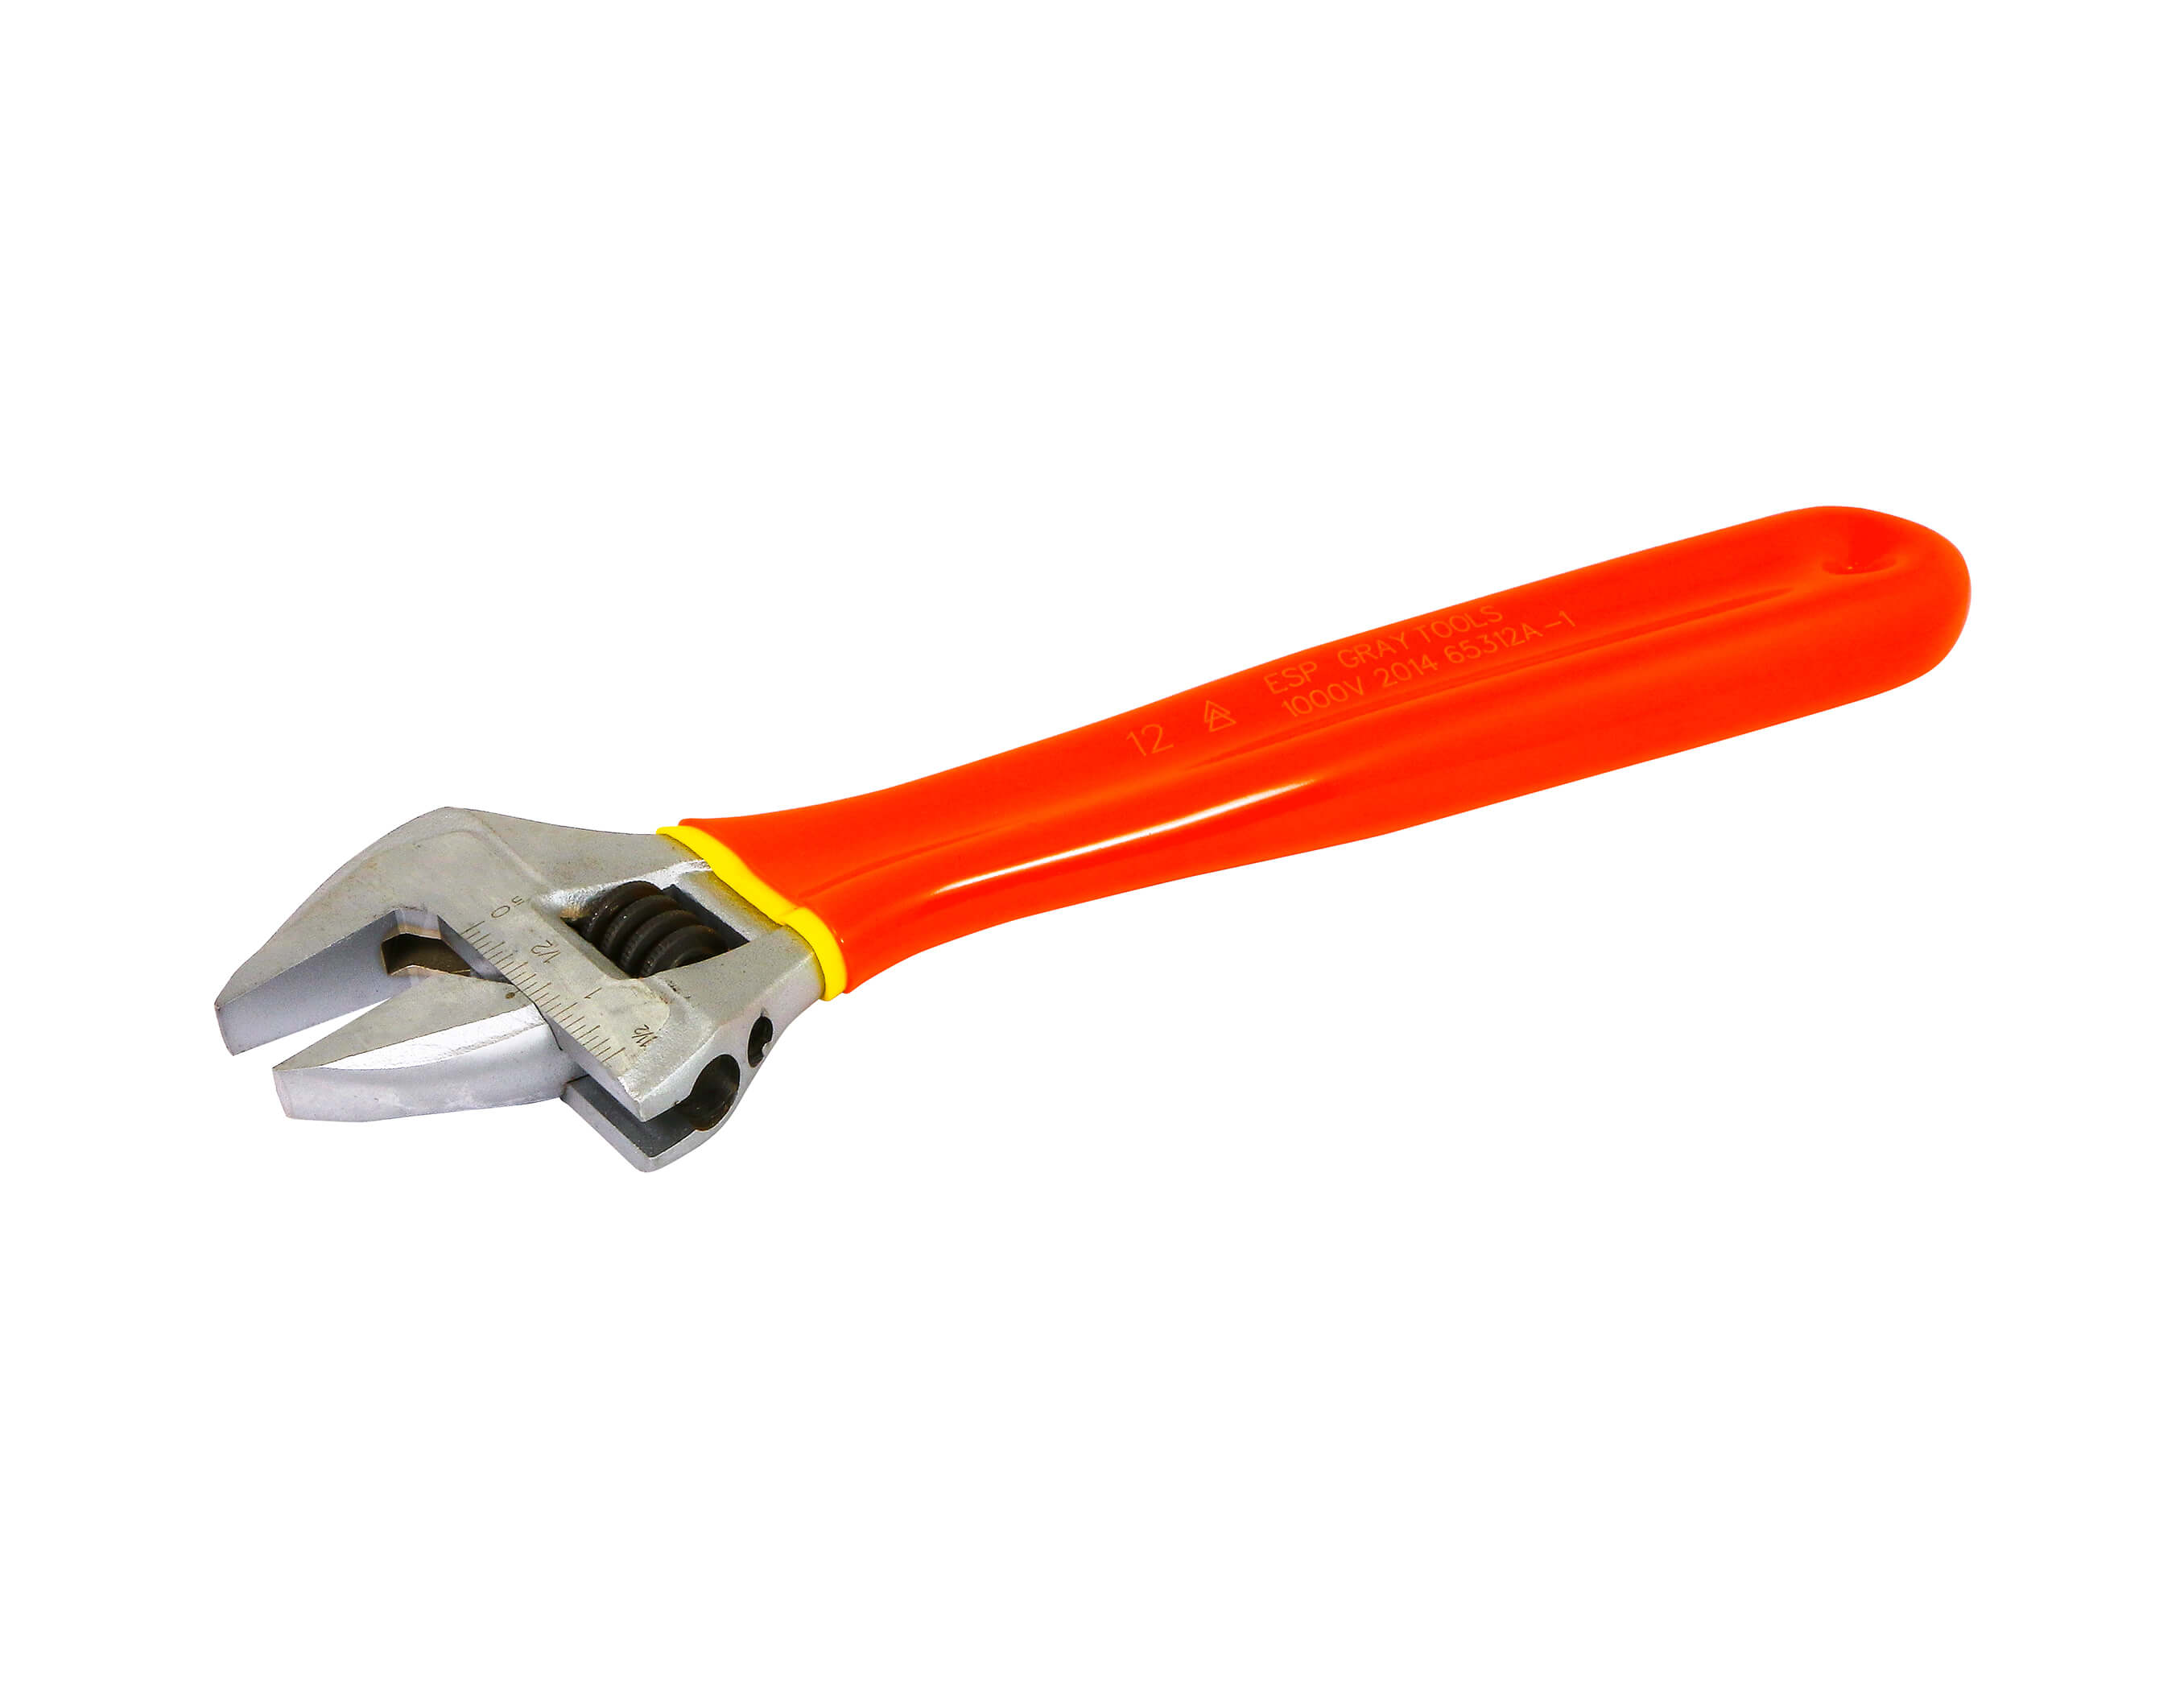 INSULATED ADJUSTABLE OPEN END WRENCH